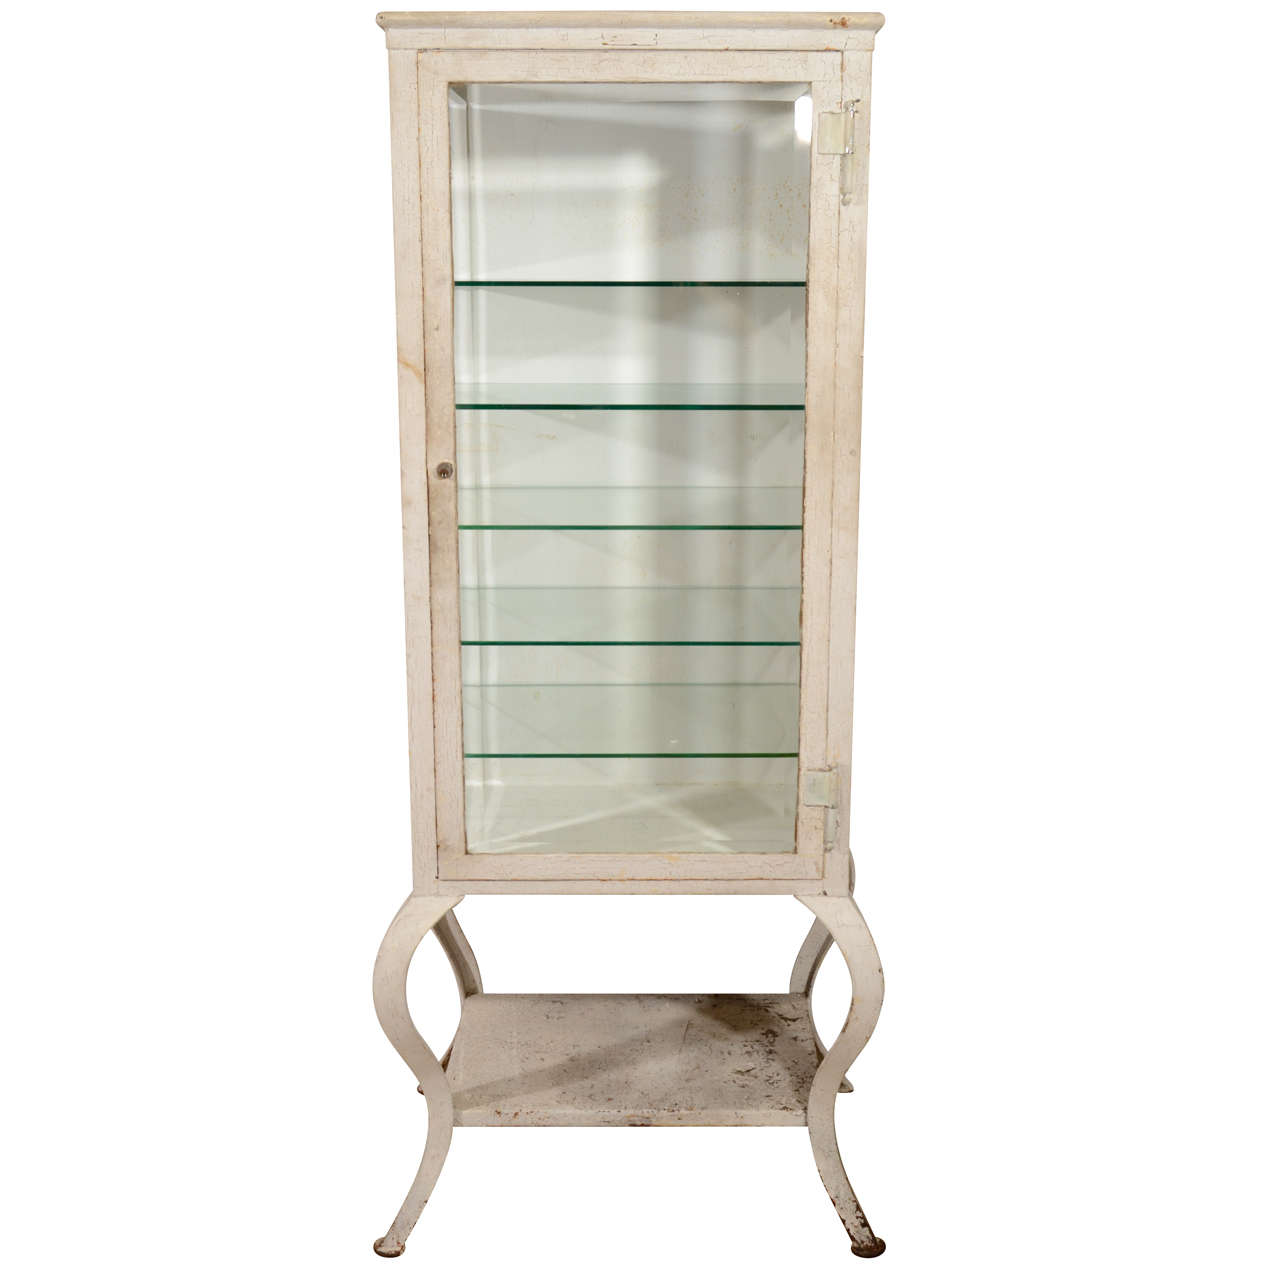 Early 20th Century Medical Cabinet with Cabriole Legs at 1stdibs